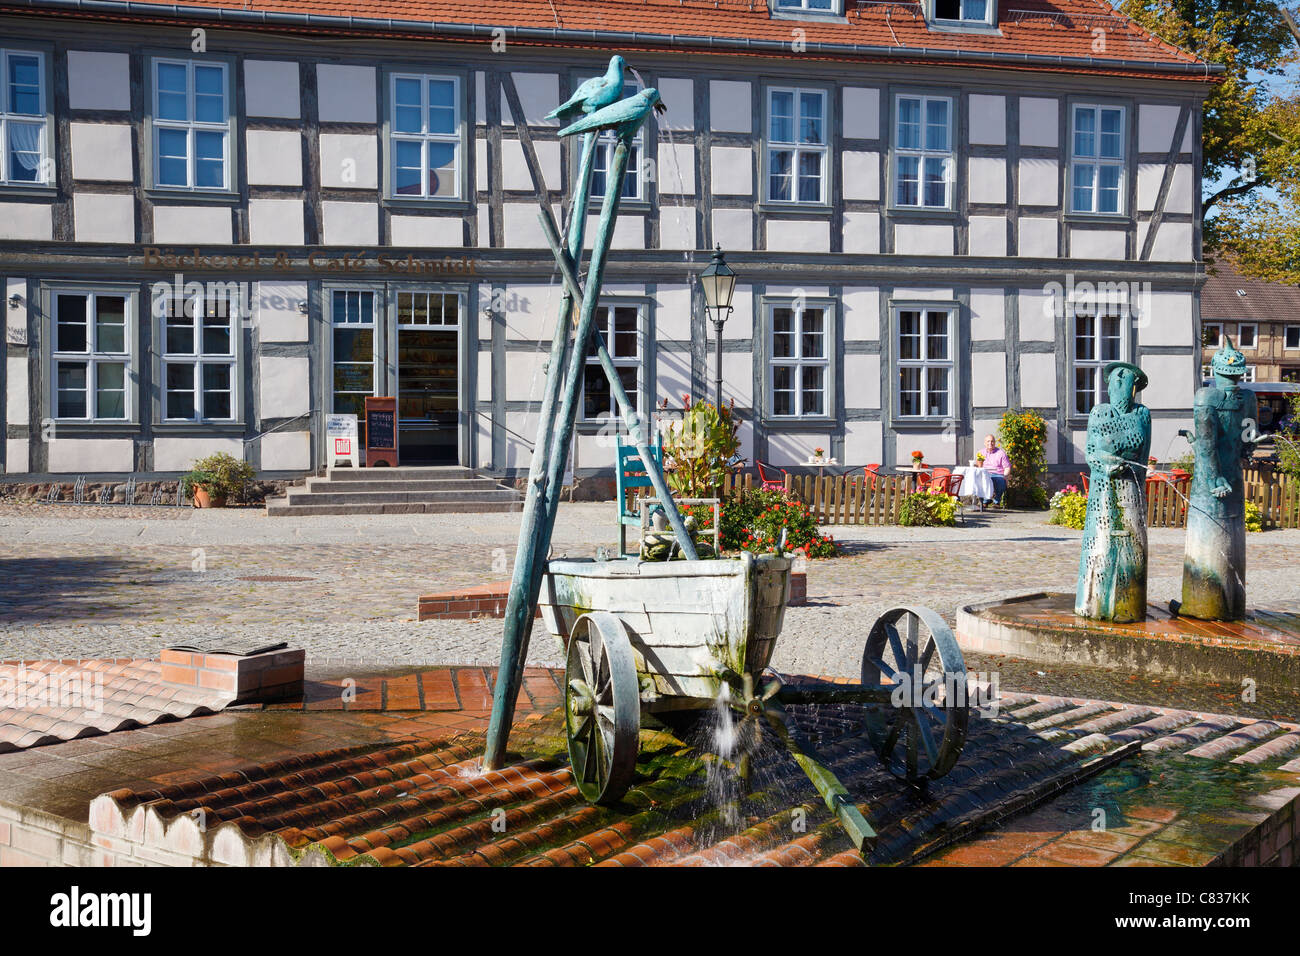 Market Place with fountain and sculptures by Christian Uhlig, Angermuende, Brandenburg, Germany Stock Photo